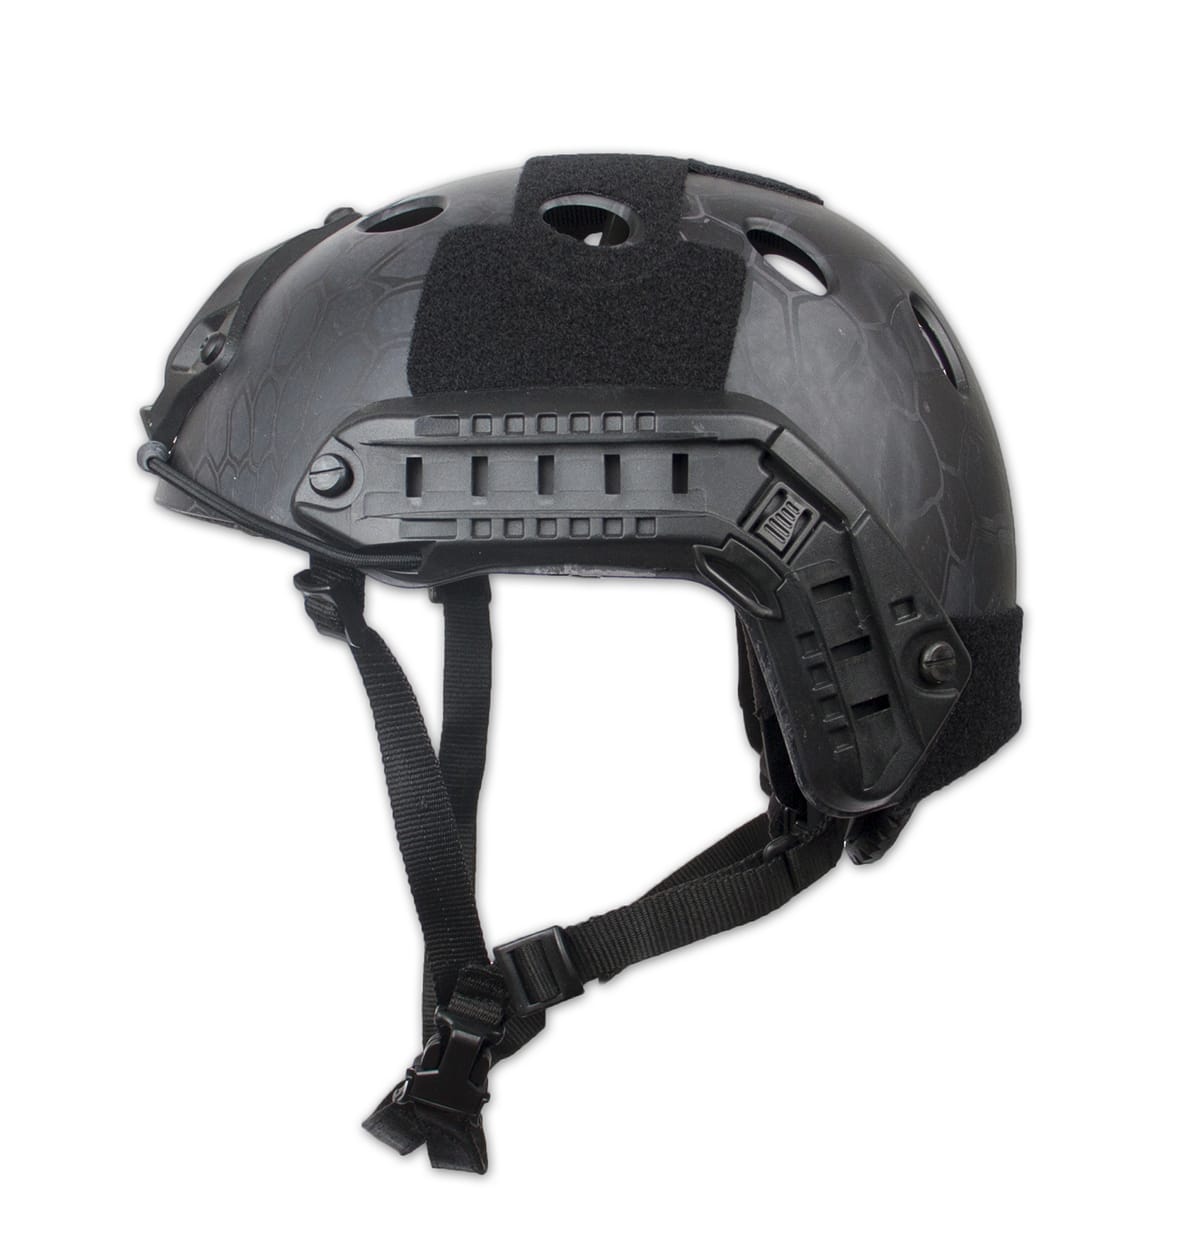 Top 10 Mountain Climbing Gear - Tactical Bump Helmet by Chase Tactical